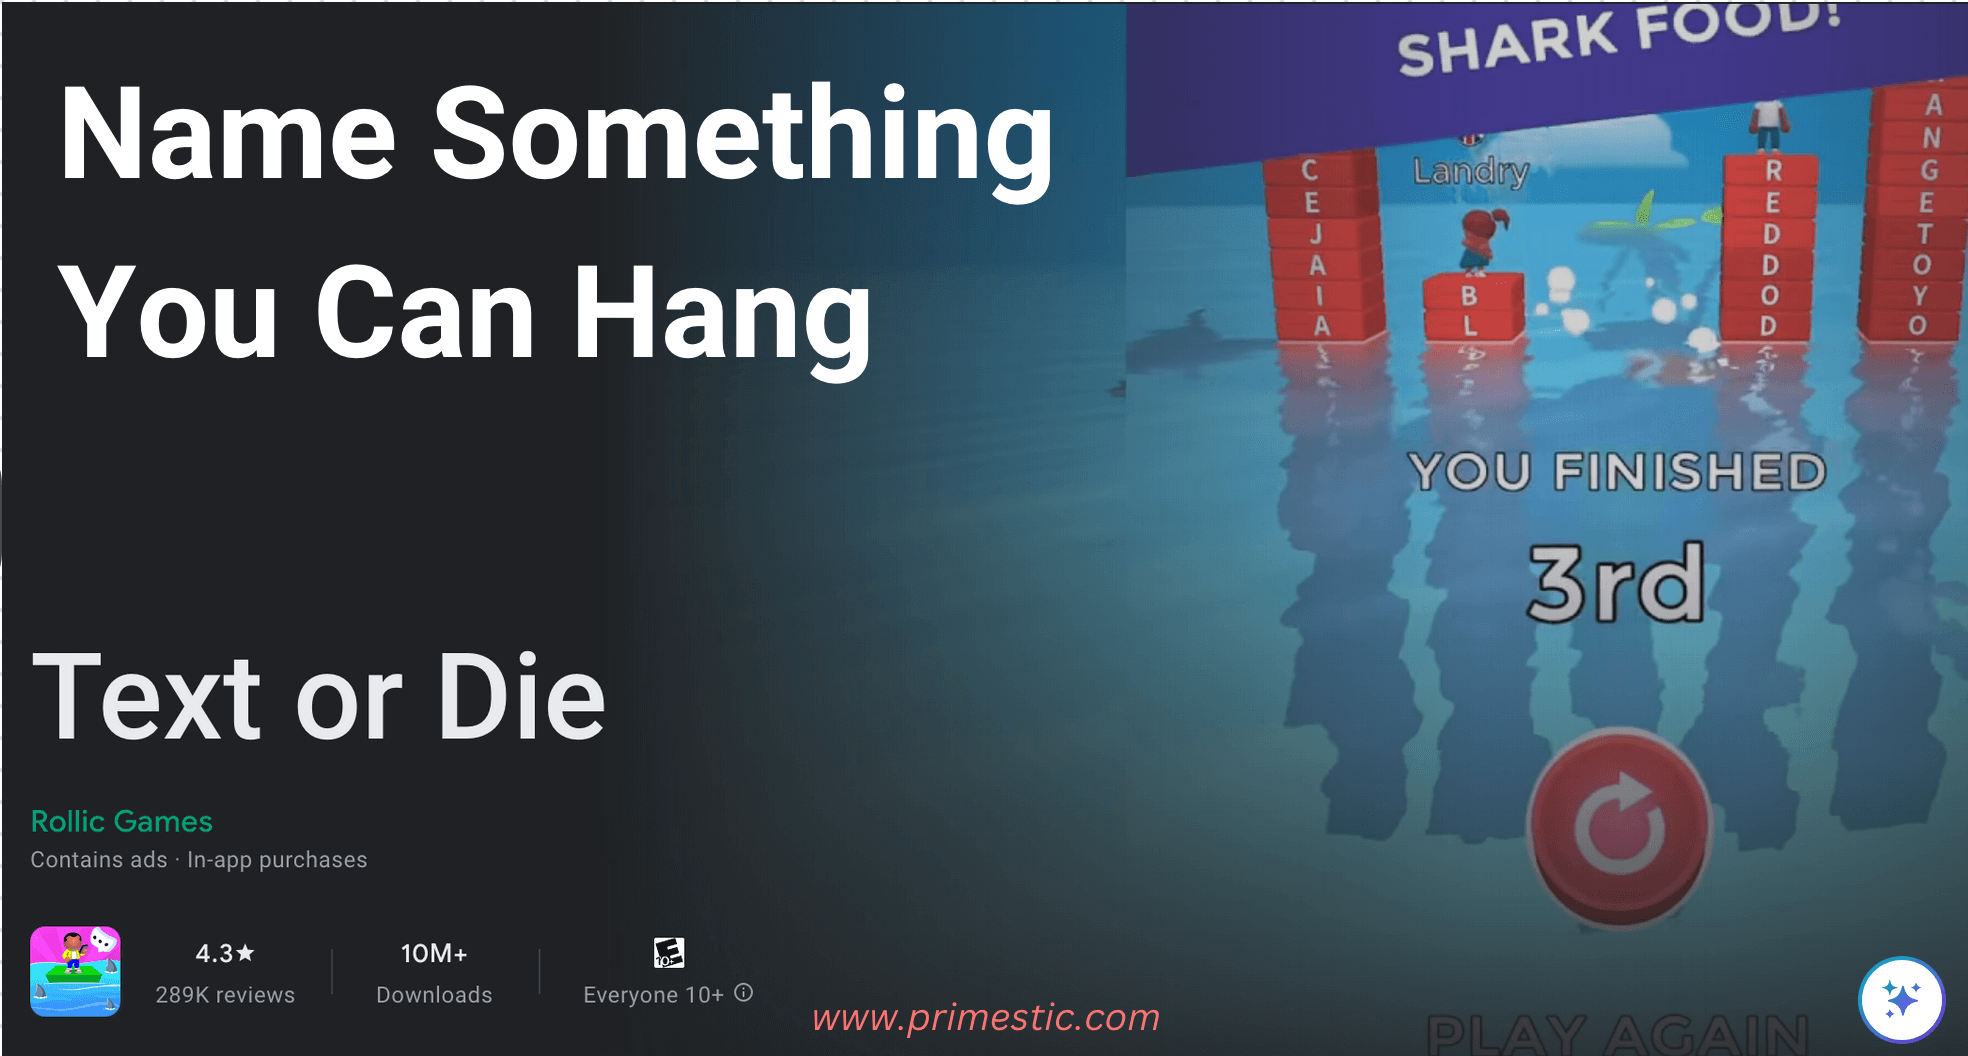 Name Something You Can Hang: Text or Die